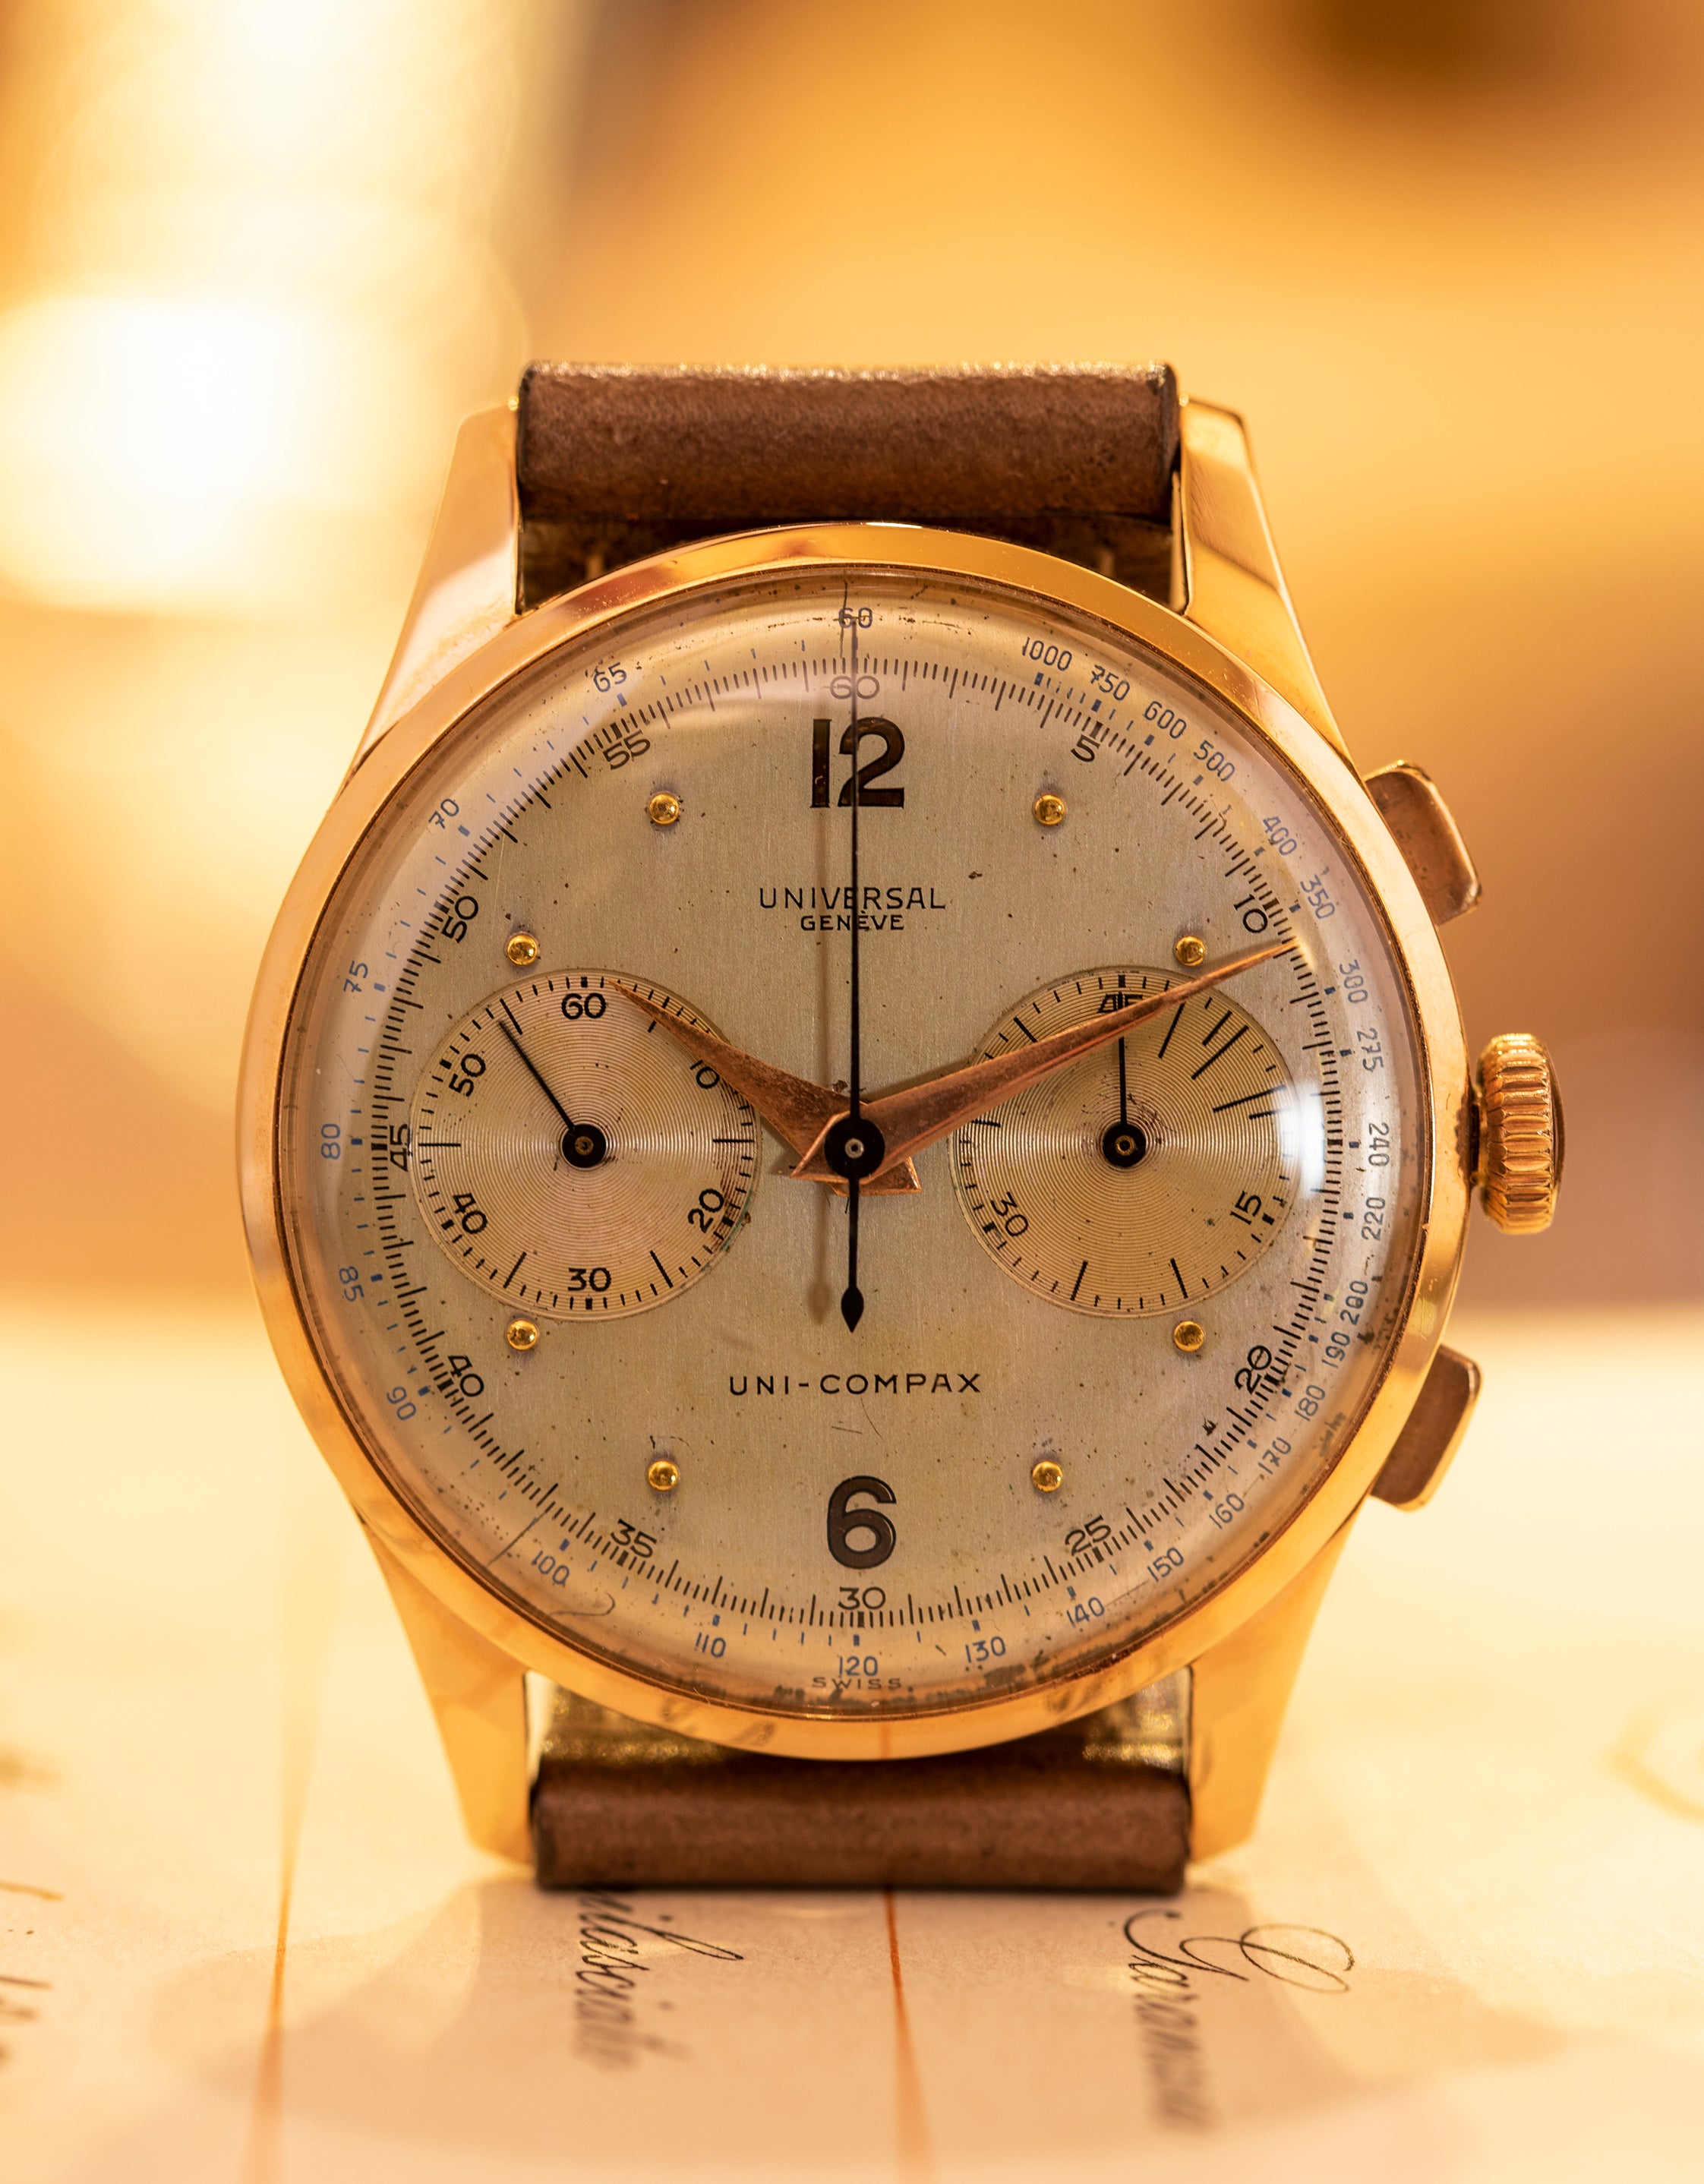 Universal Genève Ref. 1241162 Uni-Compax two tone dial - in rose gold l